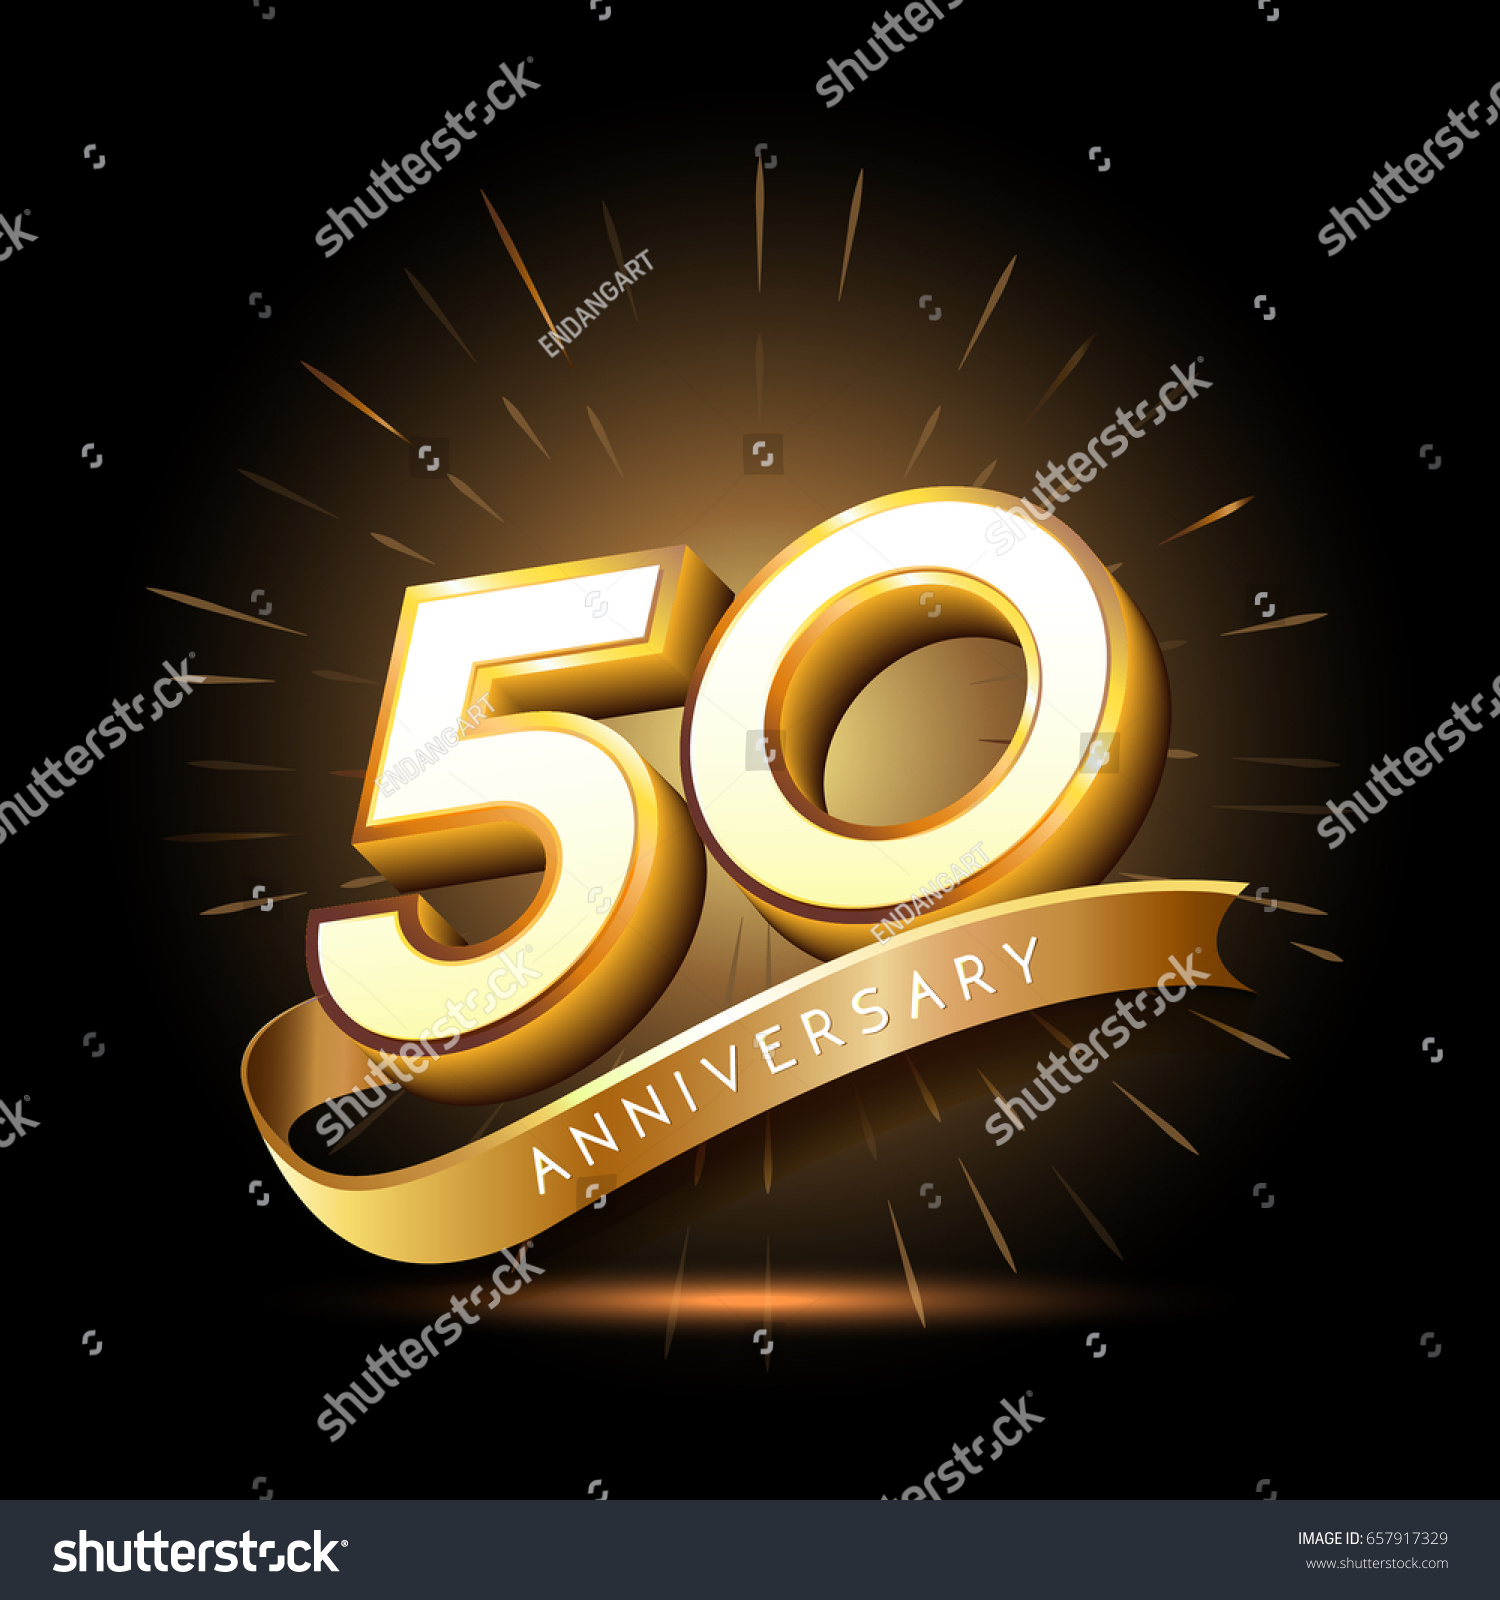 SVG of 50 years golden anniversary logo celebration with firework and ribbon svg